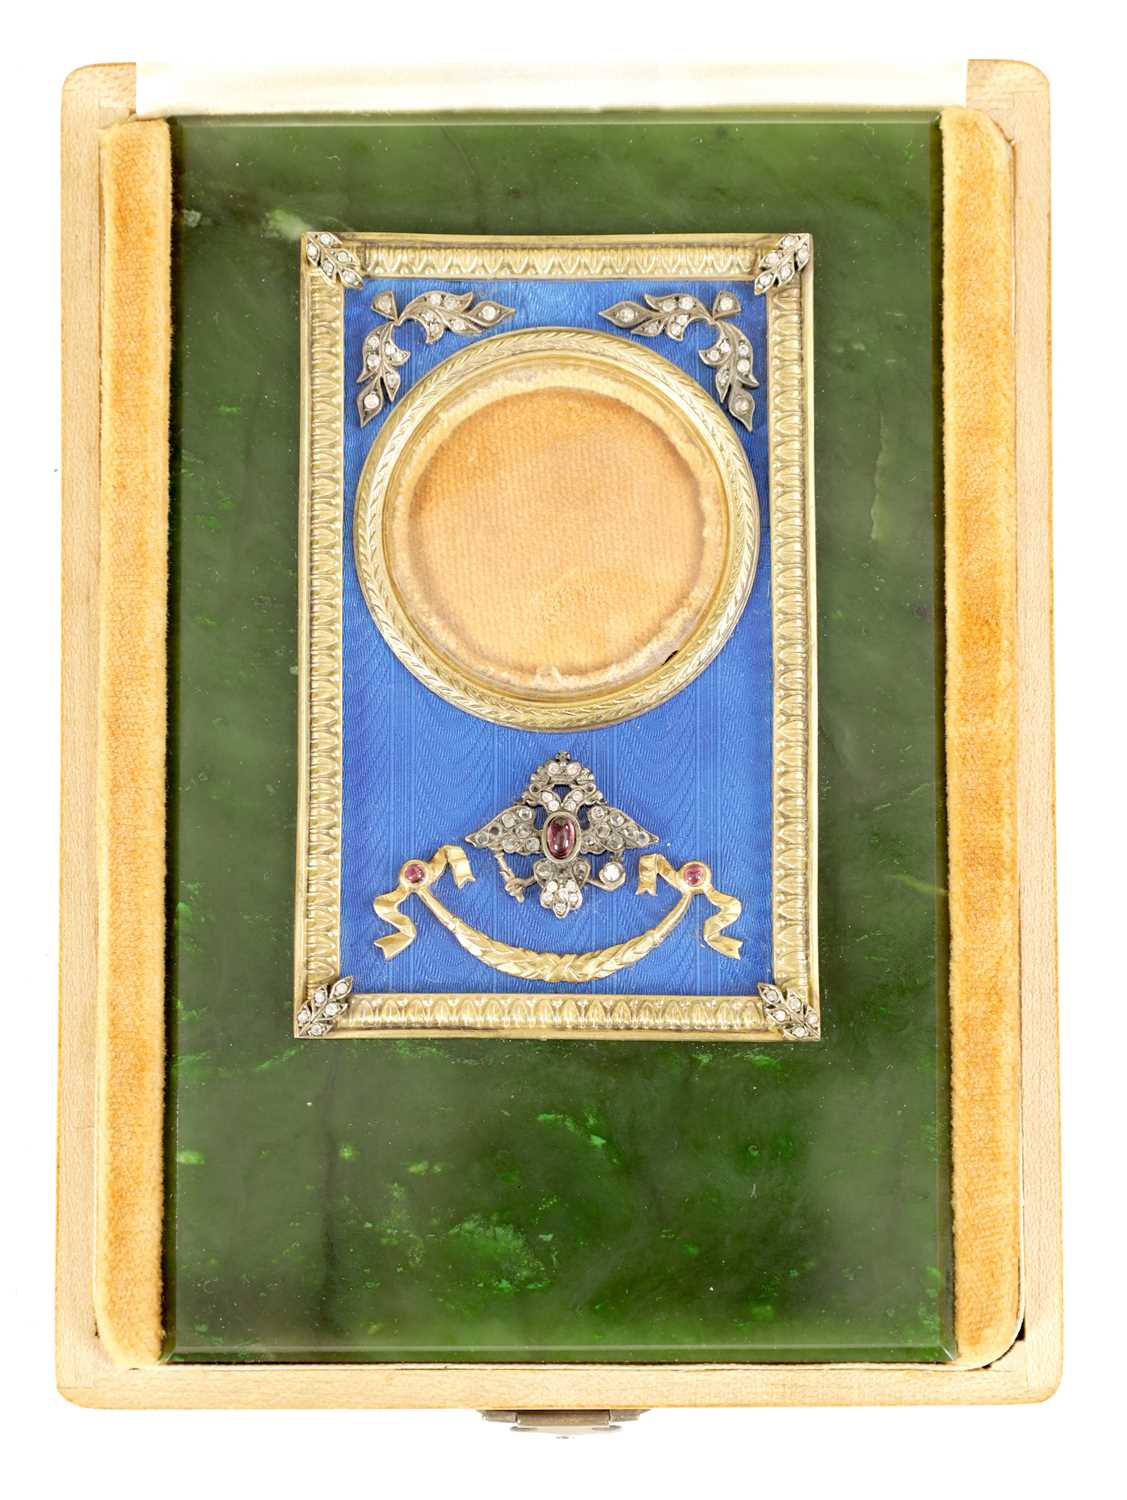 Lot 185 - FABERGÉ. AN EARLY 20TH CENTURY  RUSSIAN CASED SILVER GILT, ENAMEL AND NEPHRITE PORTRAIT FRAME